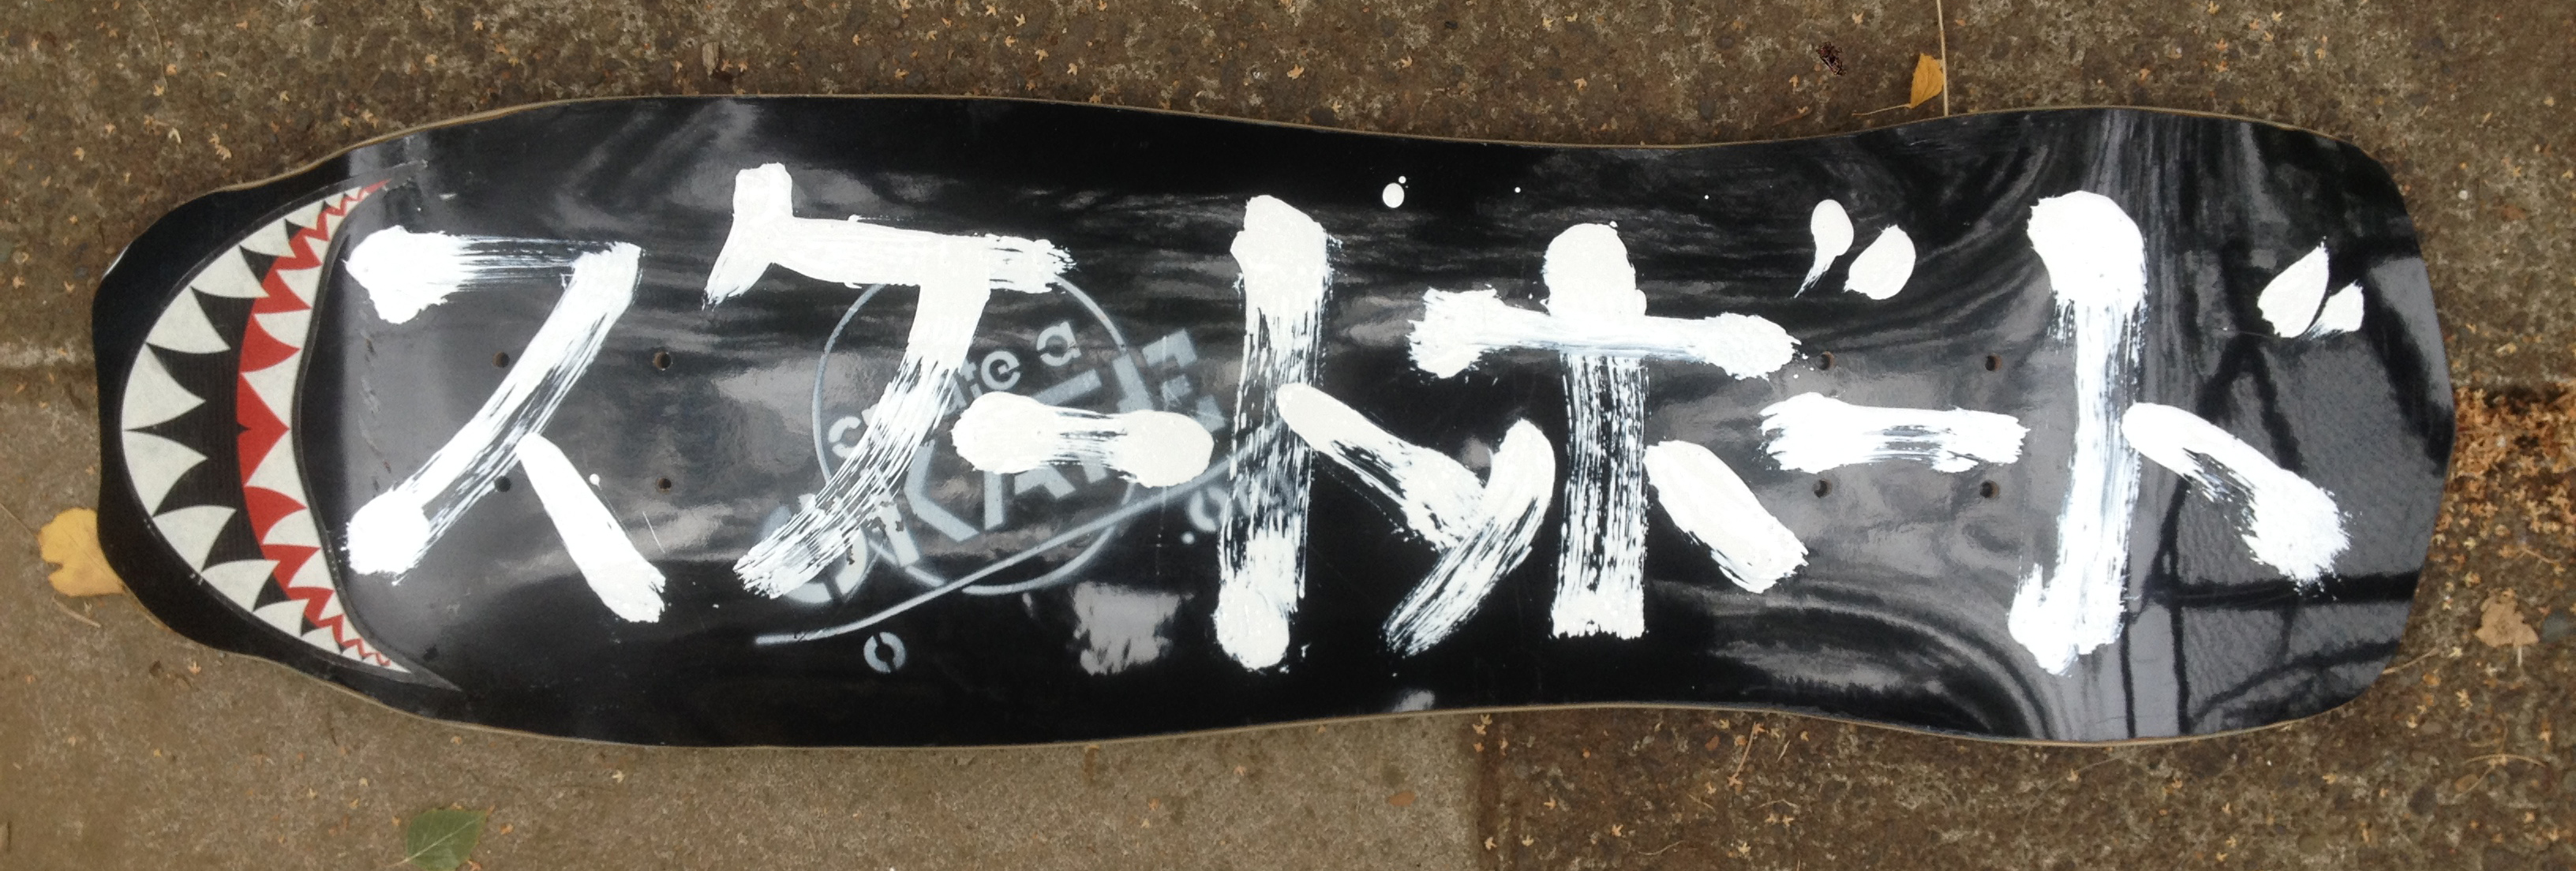 Suke-to Bo-do the japanese pronunciation of skateboard brush lettered Katakana letters in white enamel on a black hammerhead and diamond tailed skateboard I cut out at a demo for Create a Skate a few years ago